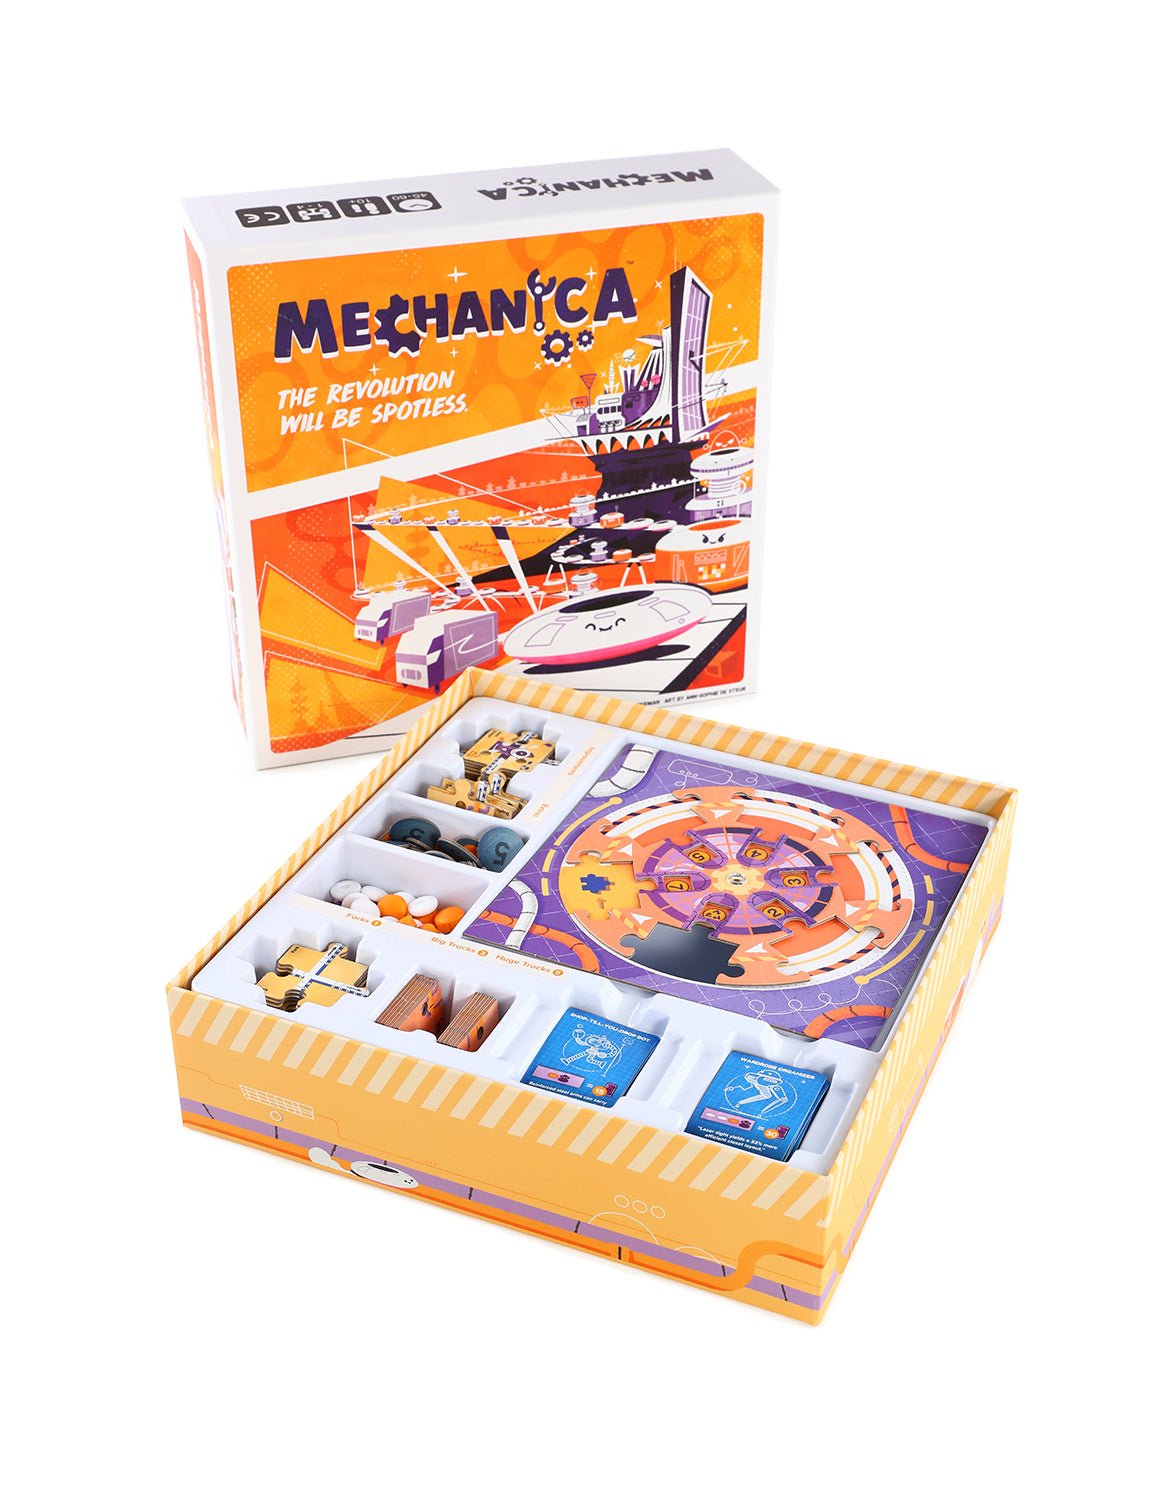 Mechanica - The Fourth Place